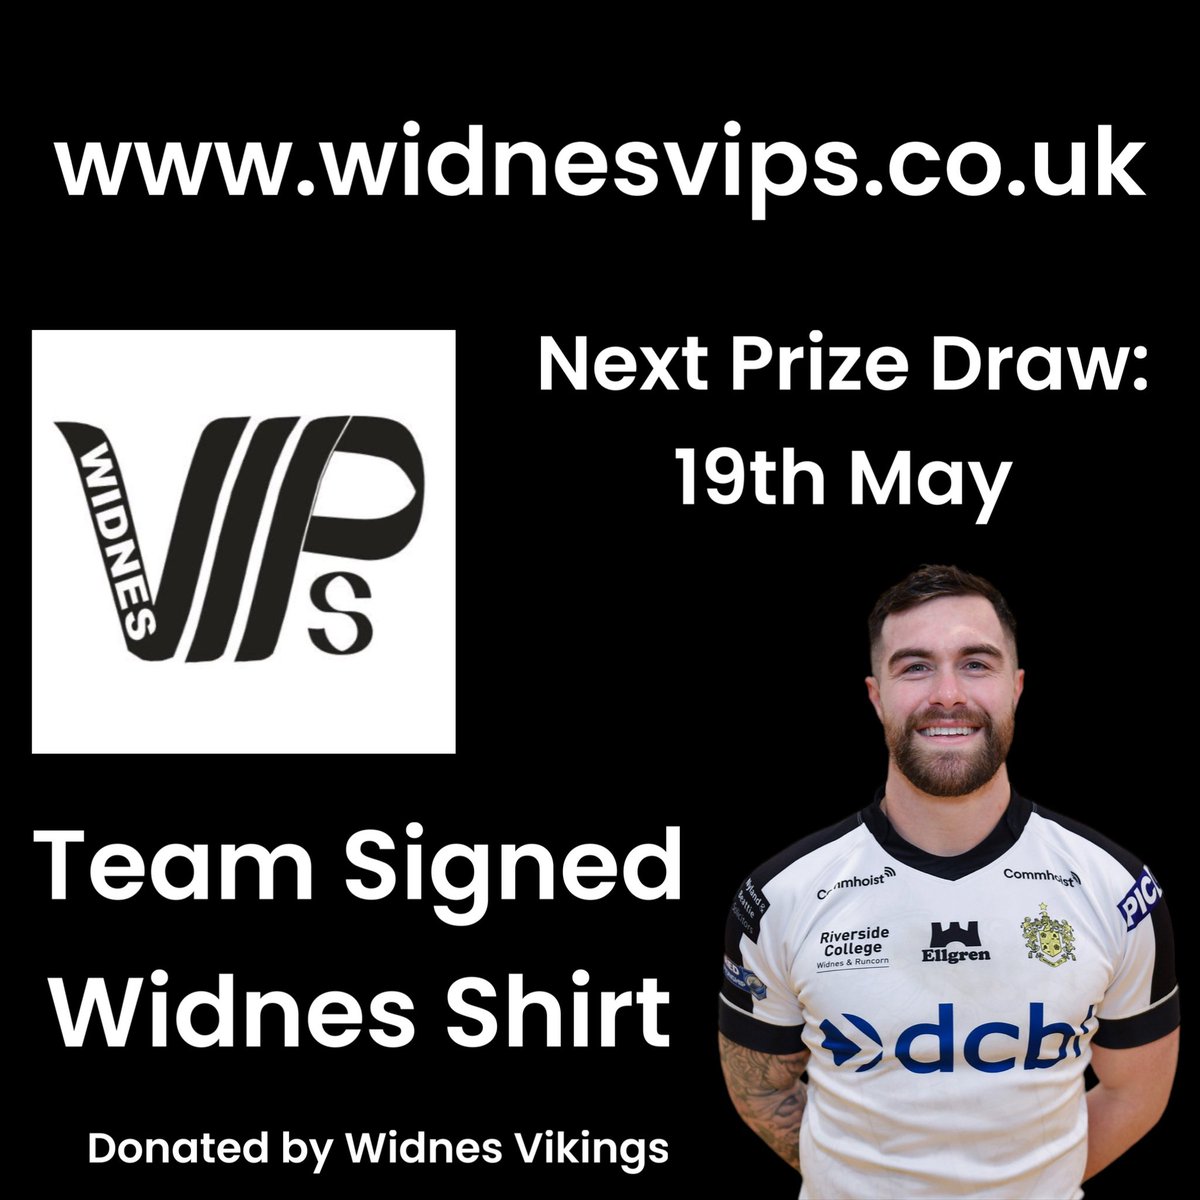 If you want to help @WidnesRL with player retention/signings, join us with a monthly donation. Sign up by 18th May & you will be included in our regular prize draw. Information on what we do & how you can help, see our website: widnesvips.co.uk